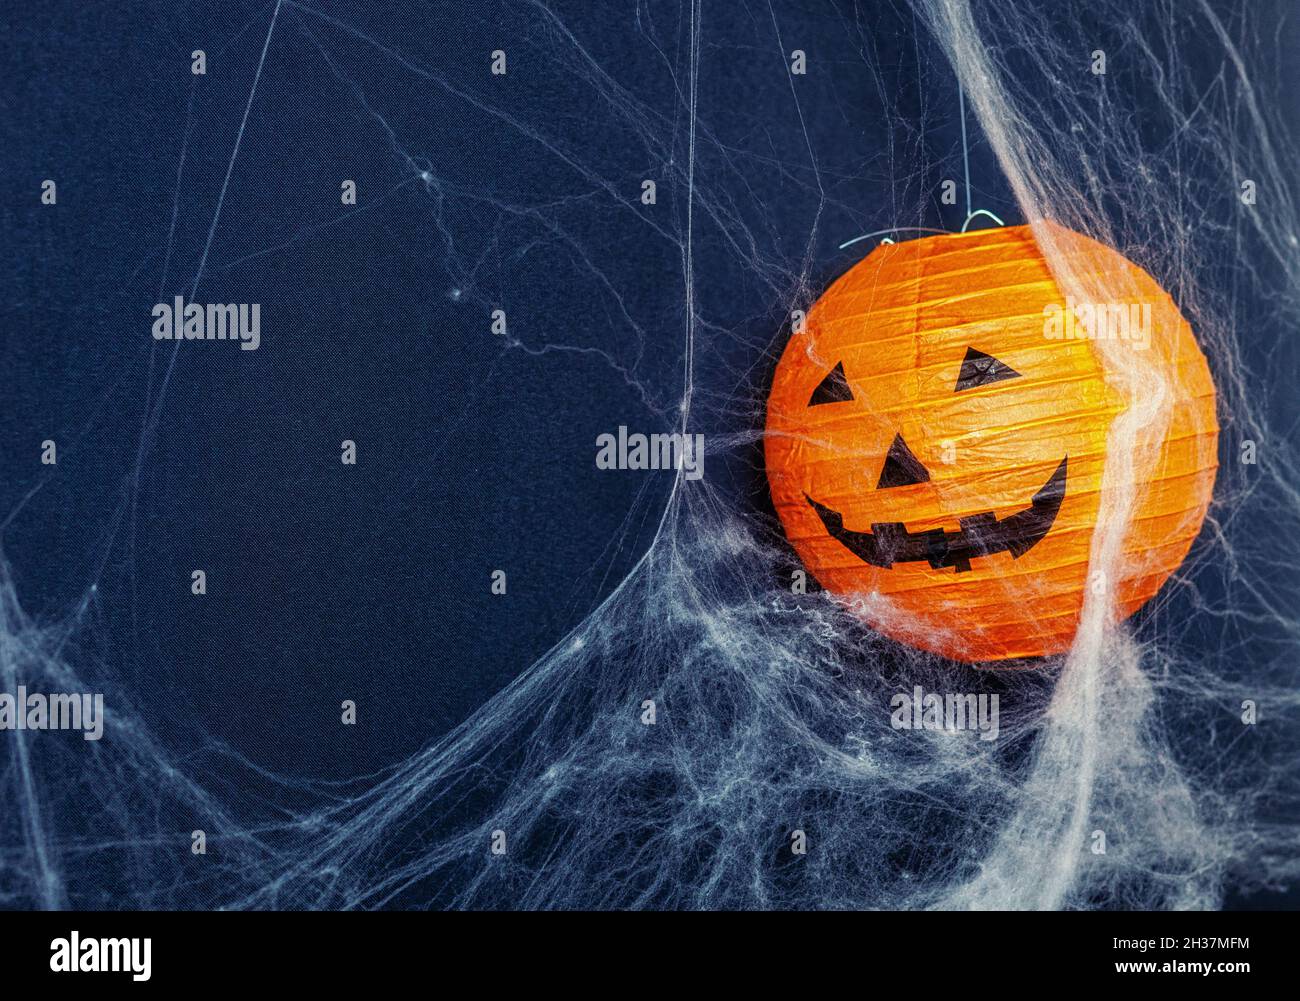 Jack o 'lantern on black background with cobwebs. Image with copyspace suitable for customization. Stock Photo